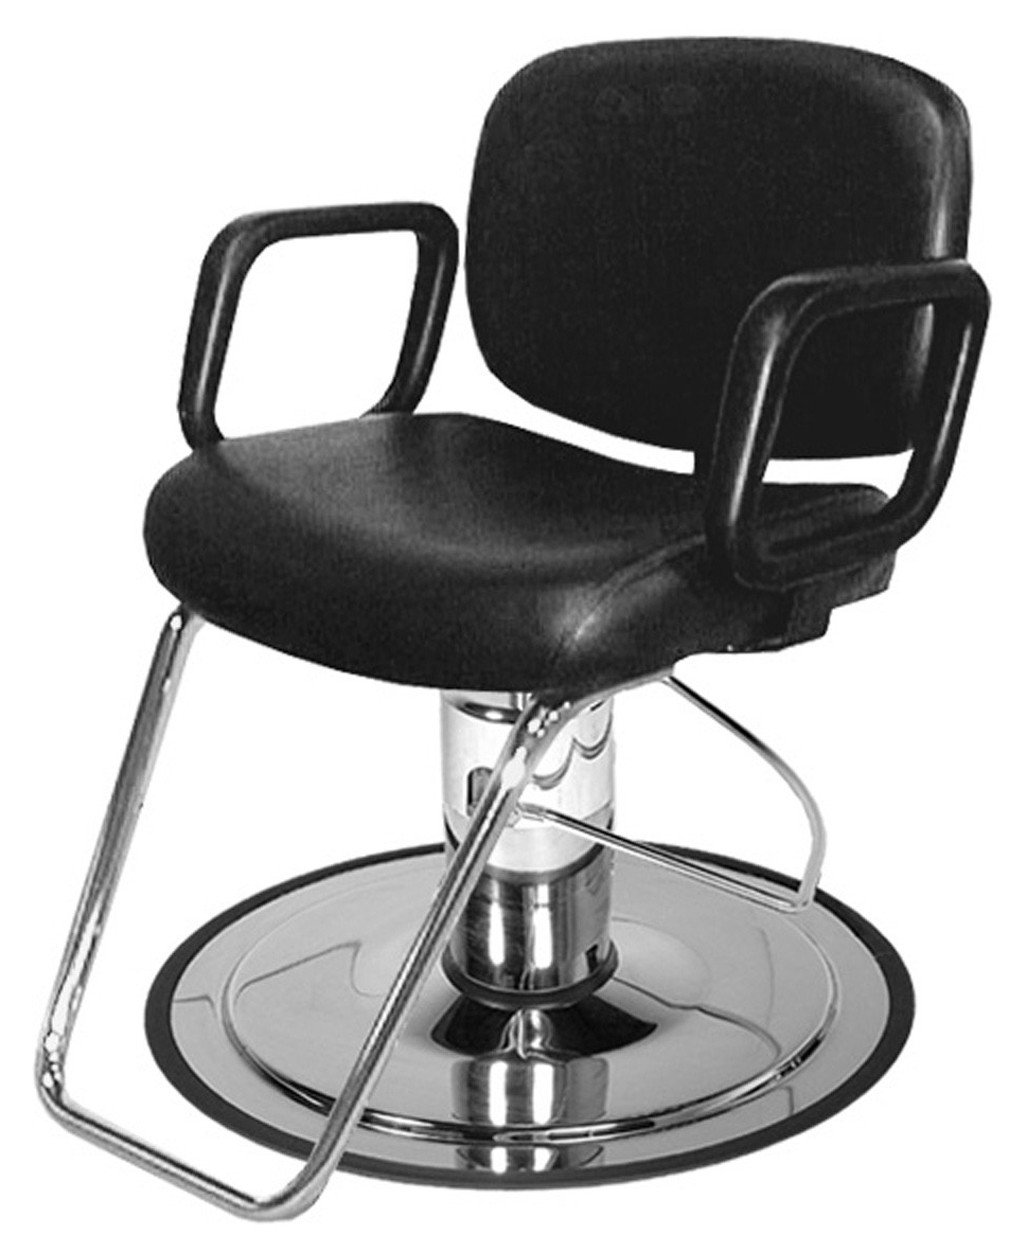 Collins 9400 Maxi Styling Chair w/ Telescoping Arms